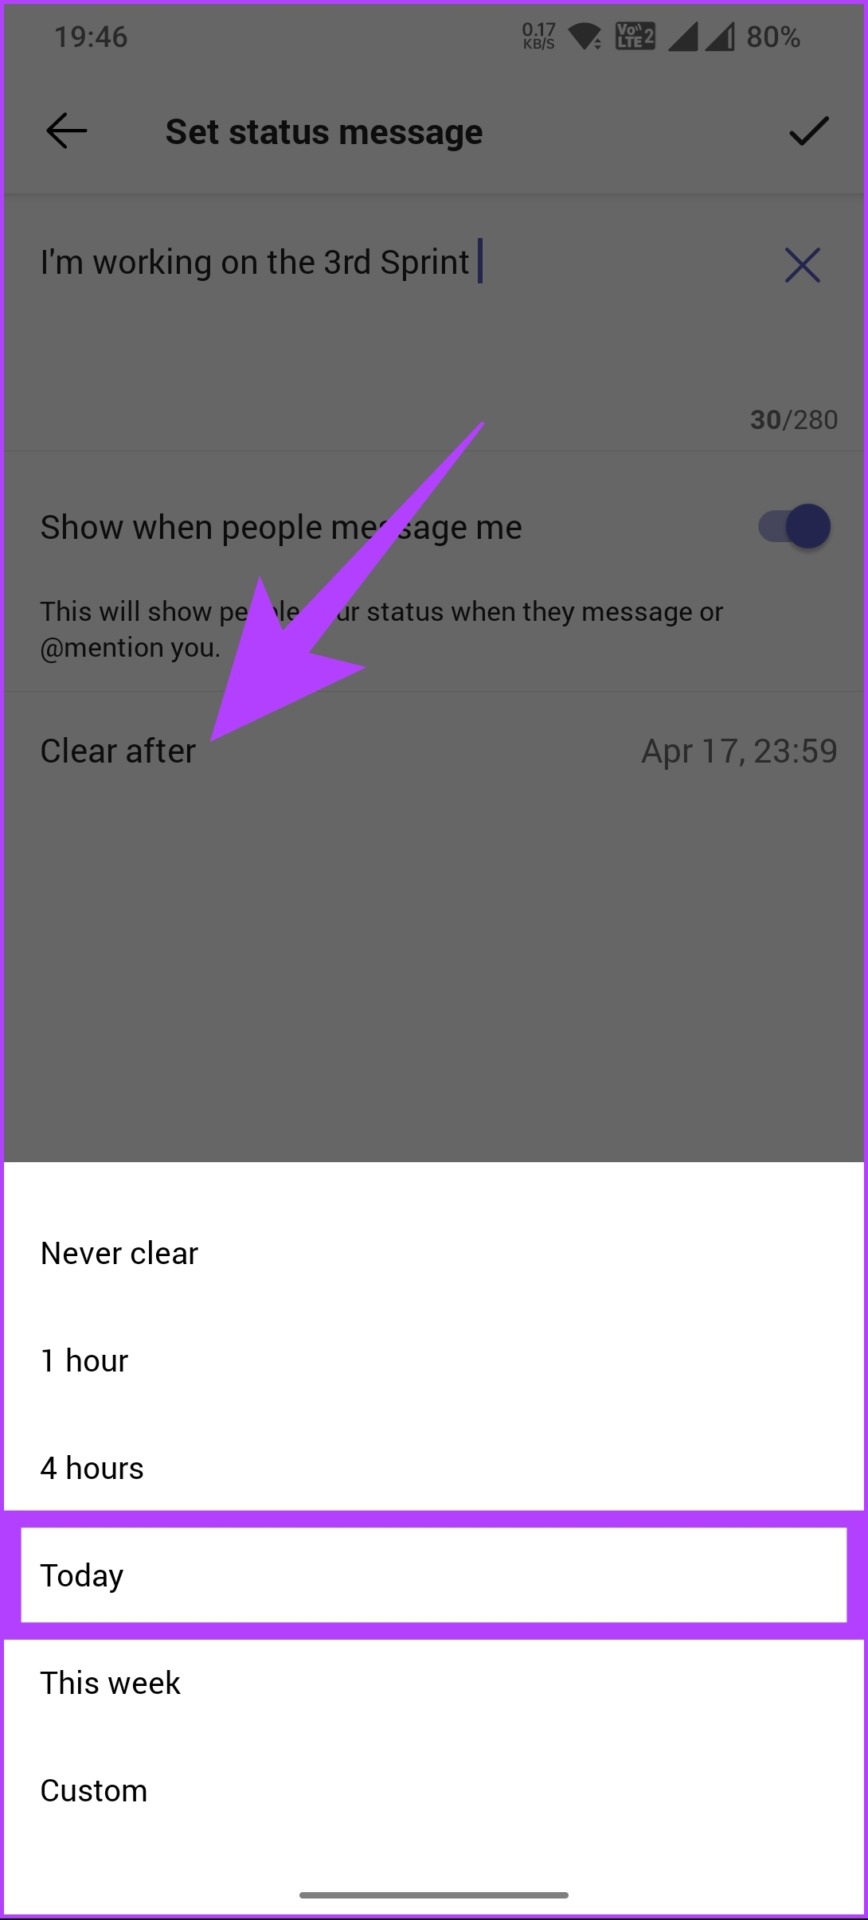 select a time after which you want the message to disappear